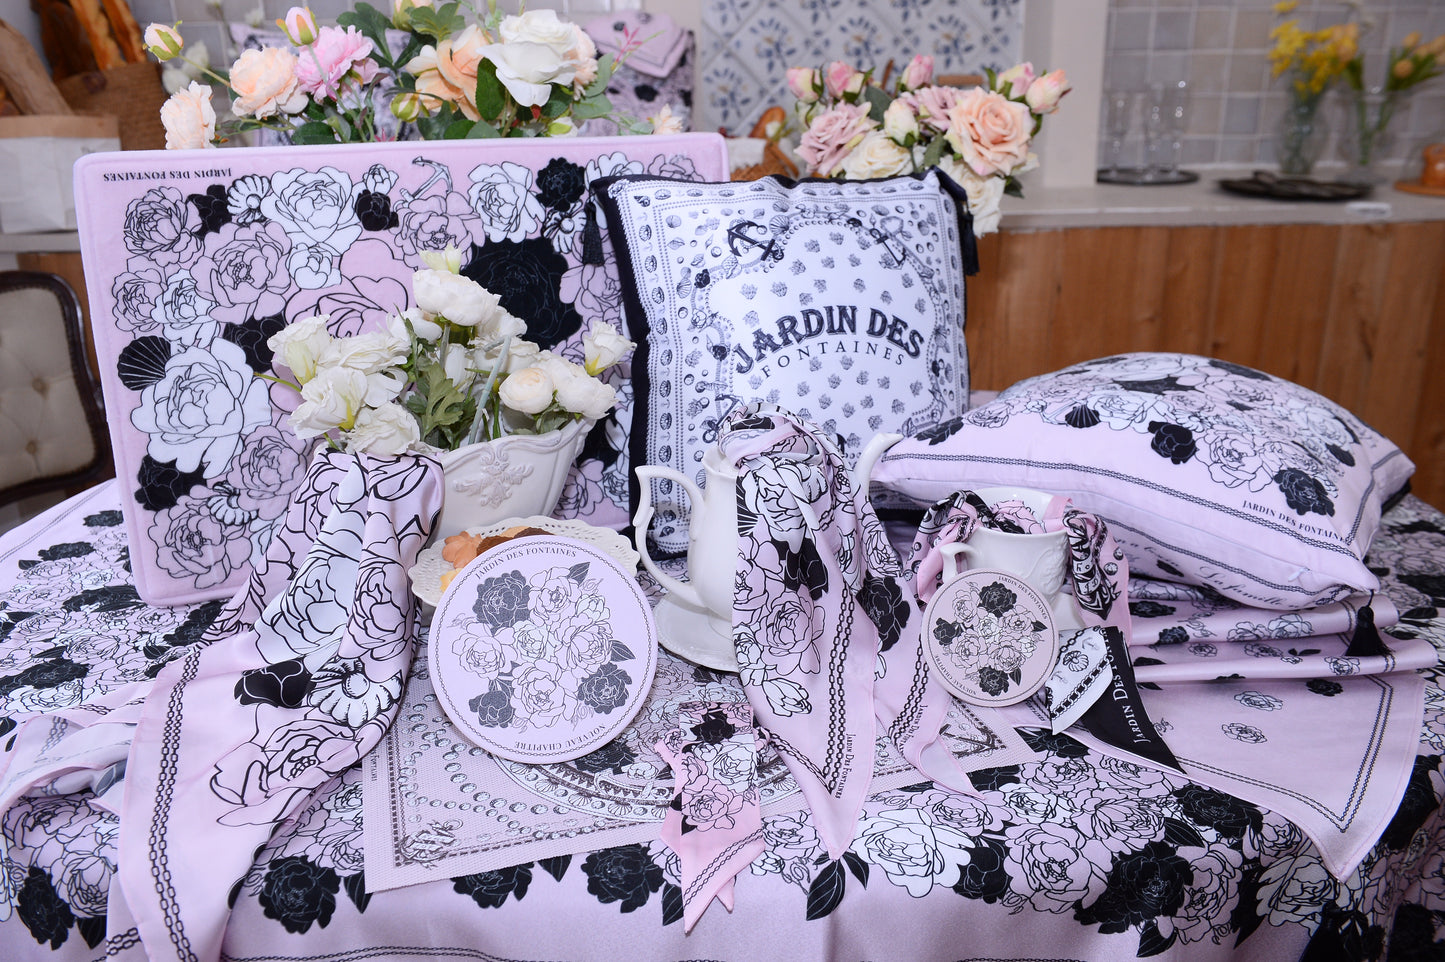 "Classy and Fabulous" Waterproof Table Runner